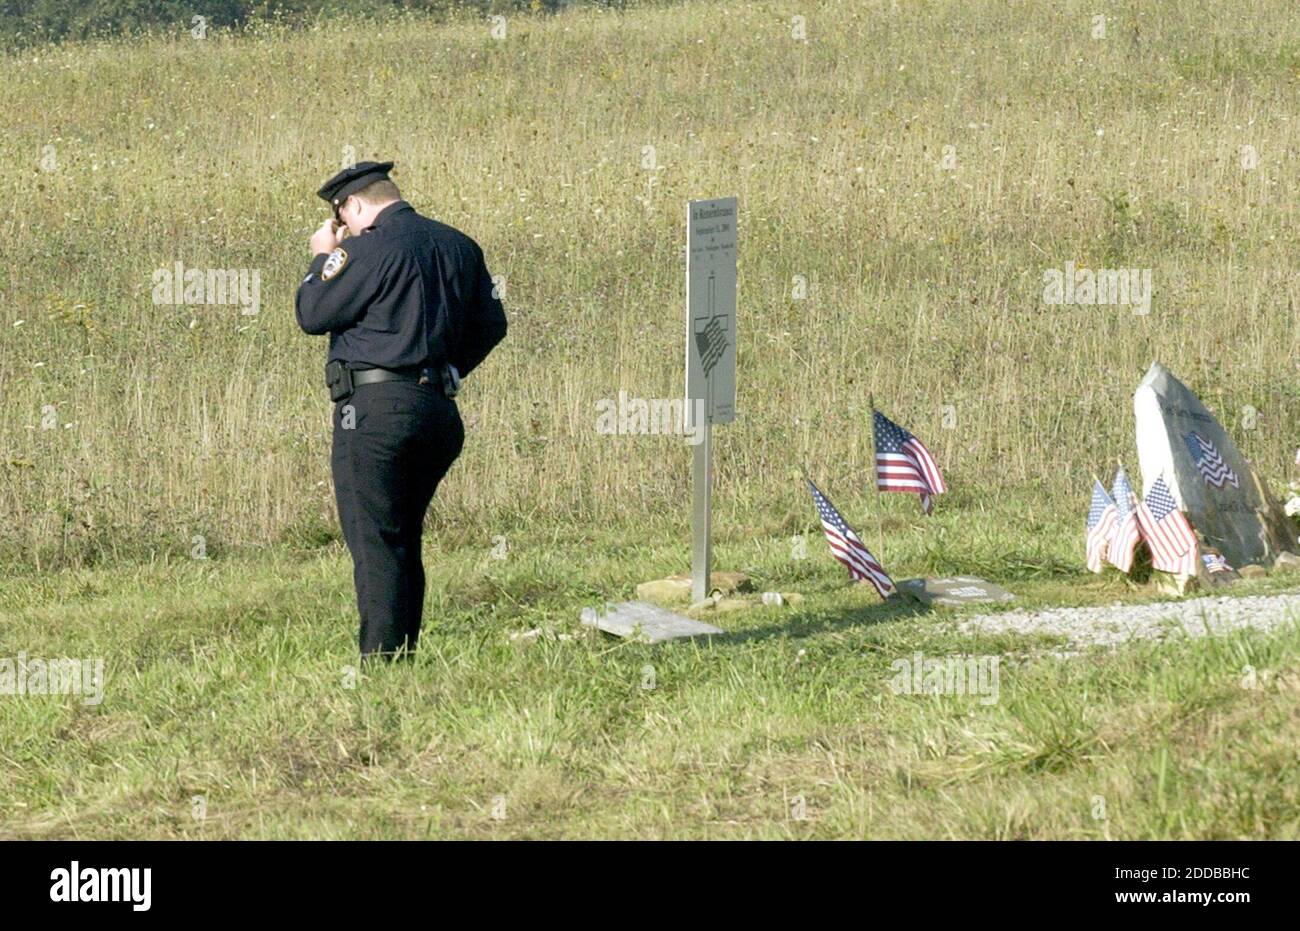 NO FILM, NO VIDEO, NO TV, NO DOCUMENTARY - Retired New York City police officer Rob O'Donnell, who was injured in the World Trade Center attack, looks over a memorial before ceremonies Saturday, September 11, 2004, in Shanksville, Pennsylvania, honoring those killed when Flight 93 crashed after being hijacked by terrorists in 2001. Photo by Laurence Kesterson/Philadelphia Inquirer/KRT/ABACA. Stock Photo